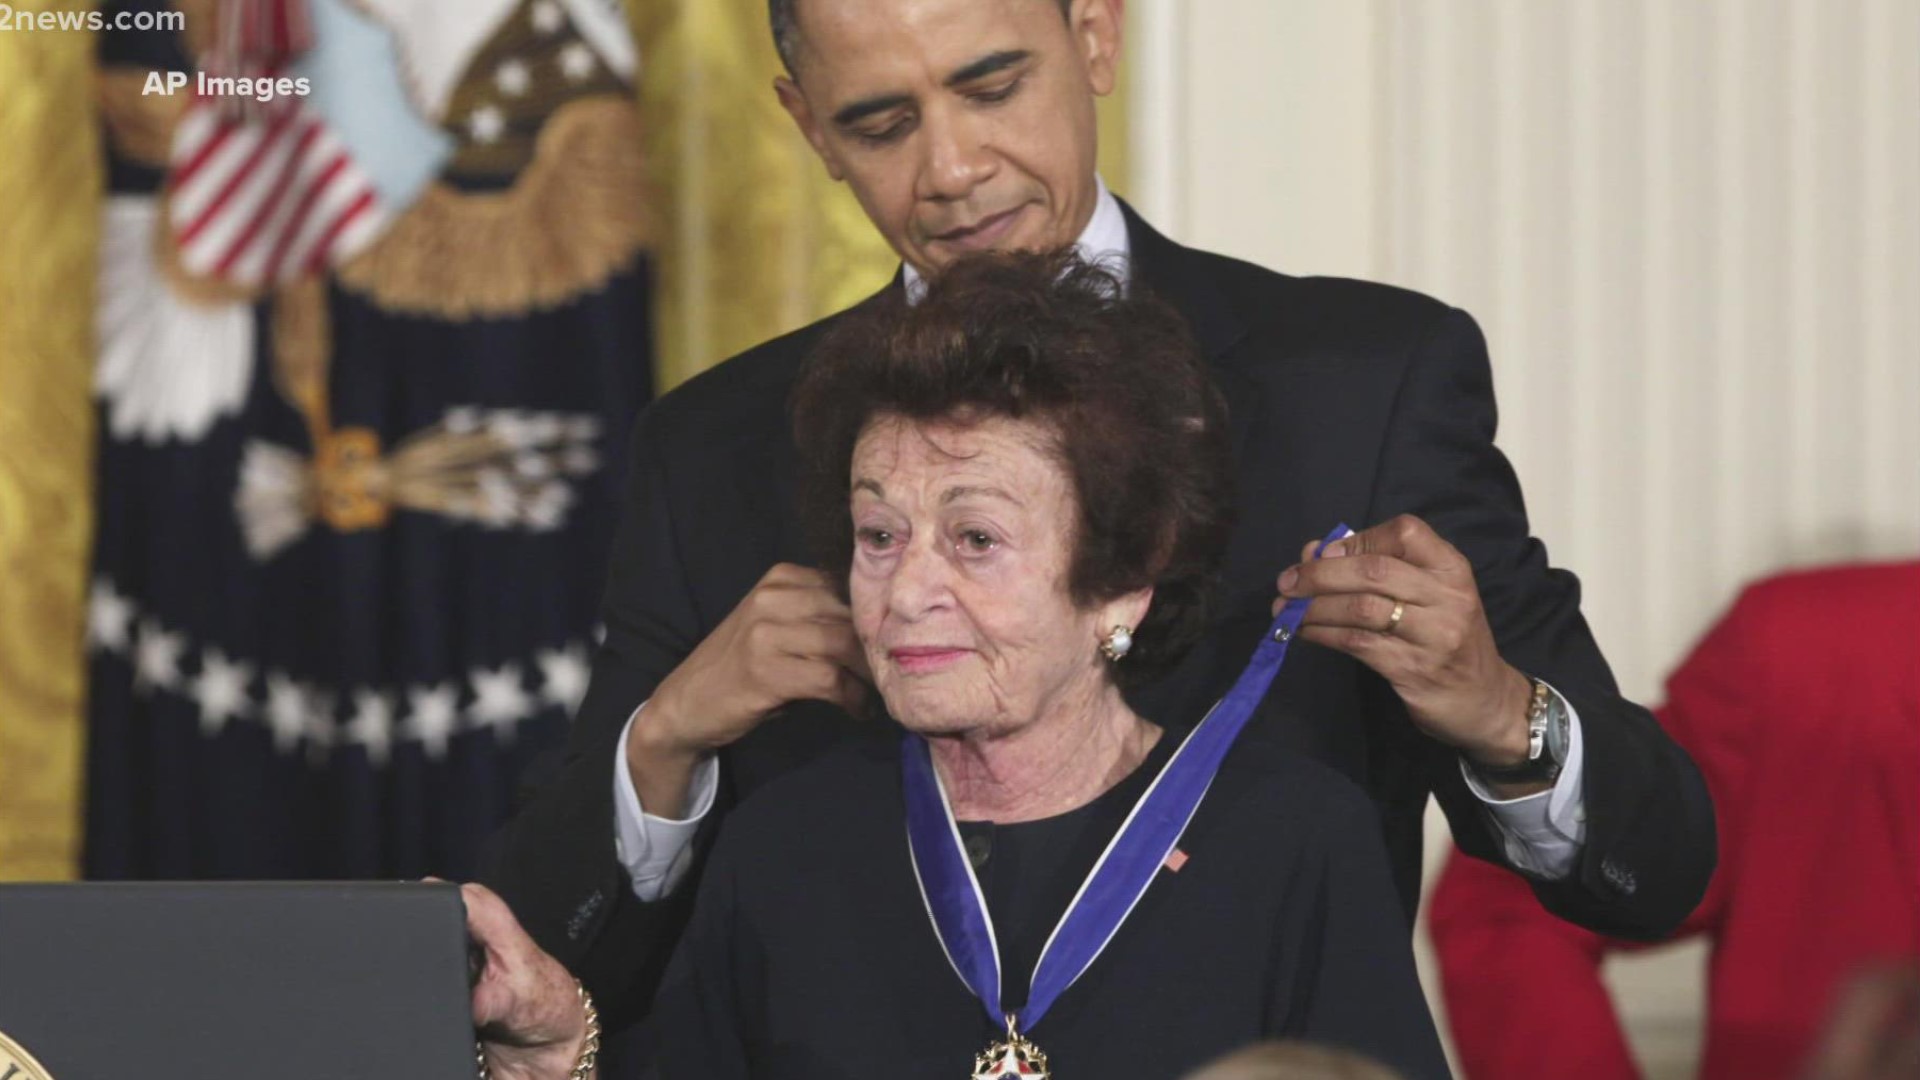 For years, Gerda Weissmann Klein called the Valley home after escaping the horrors of the Holocaust. Weissmann Klein died earlier this week at the age of 97.